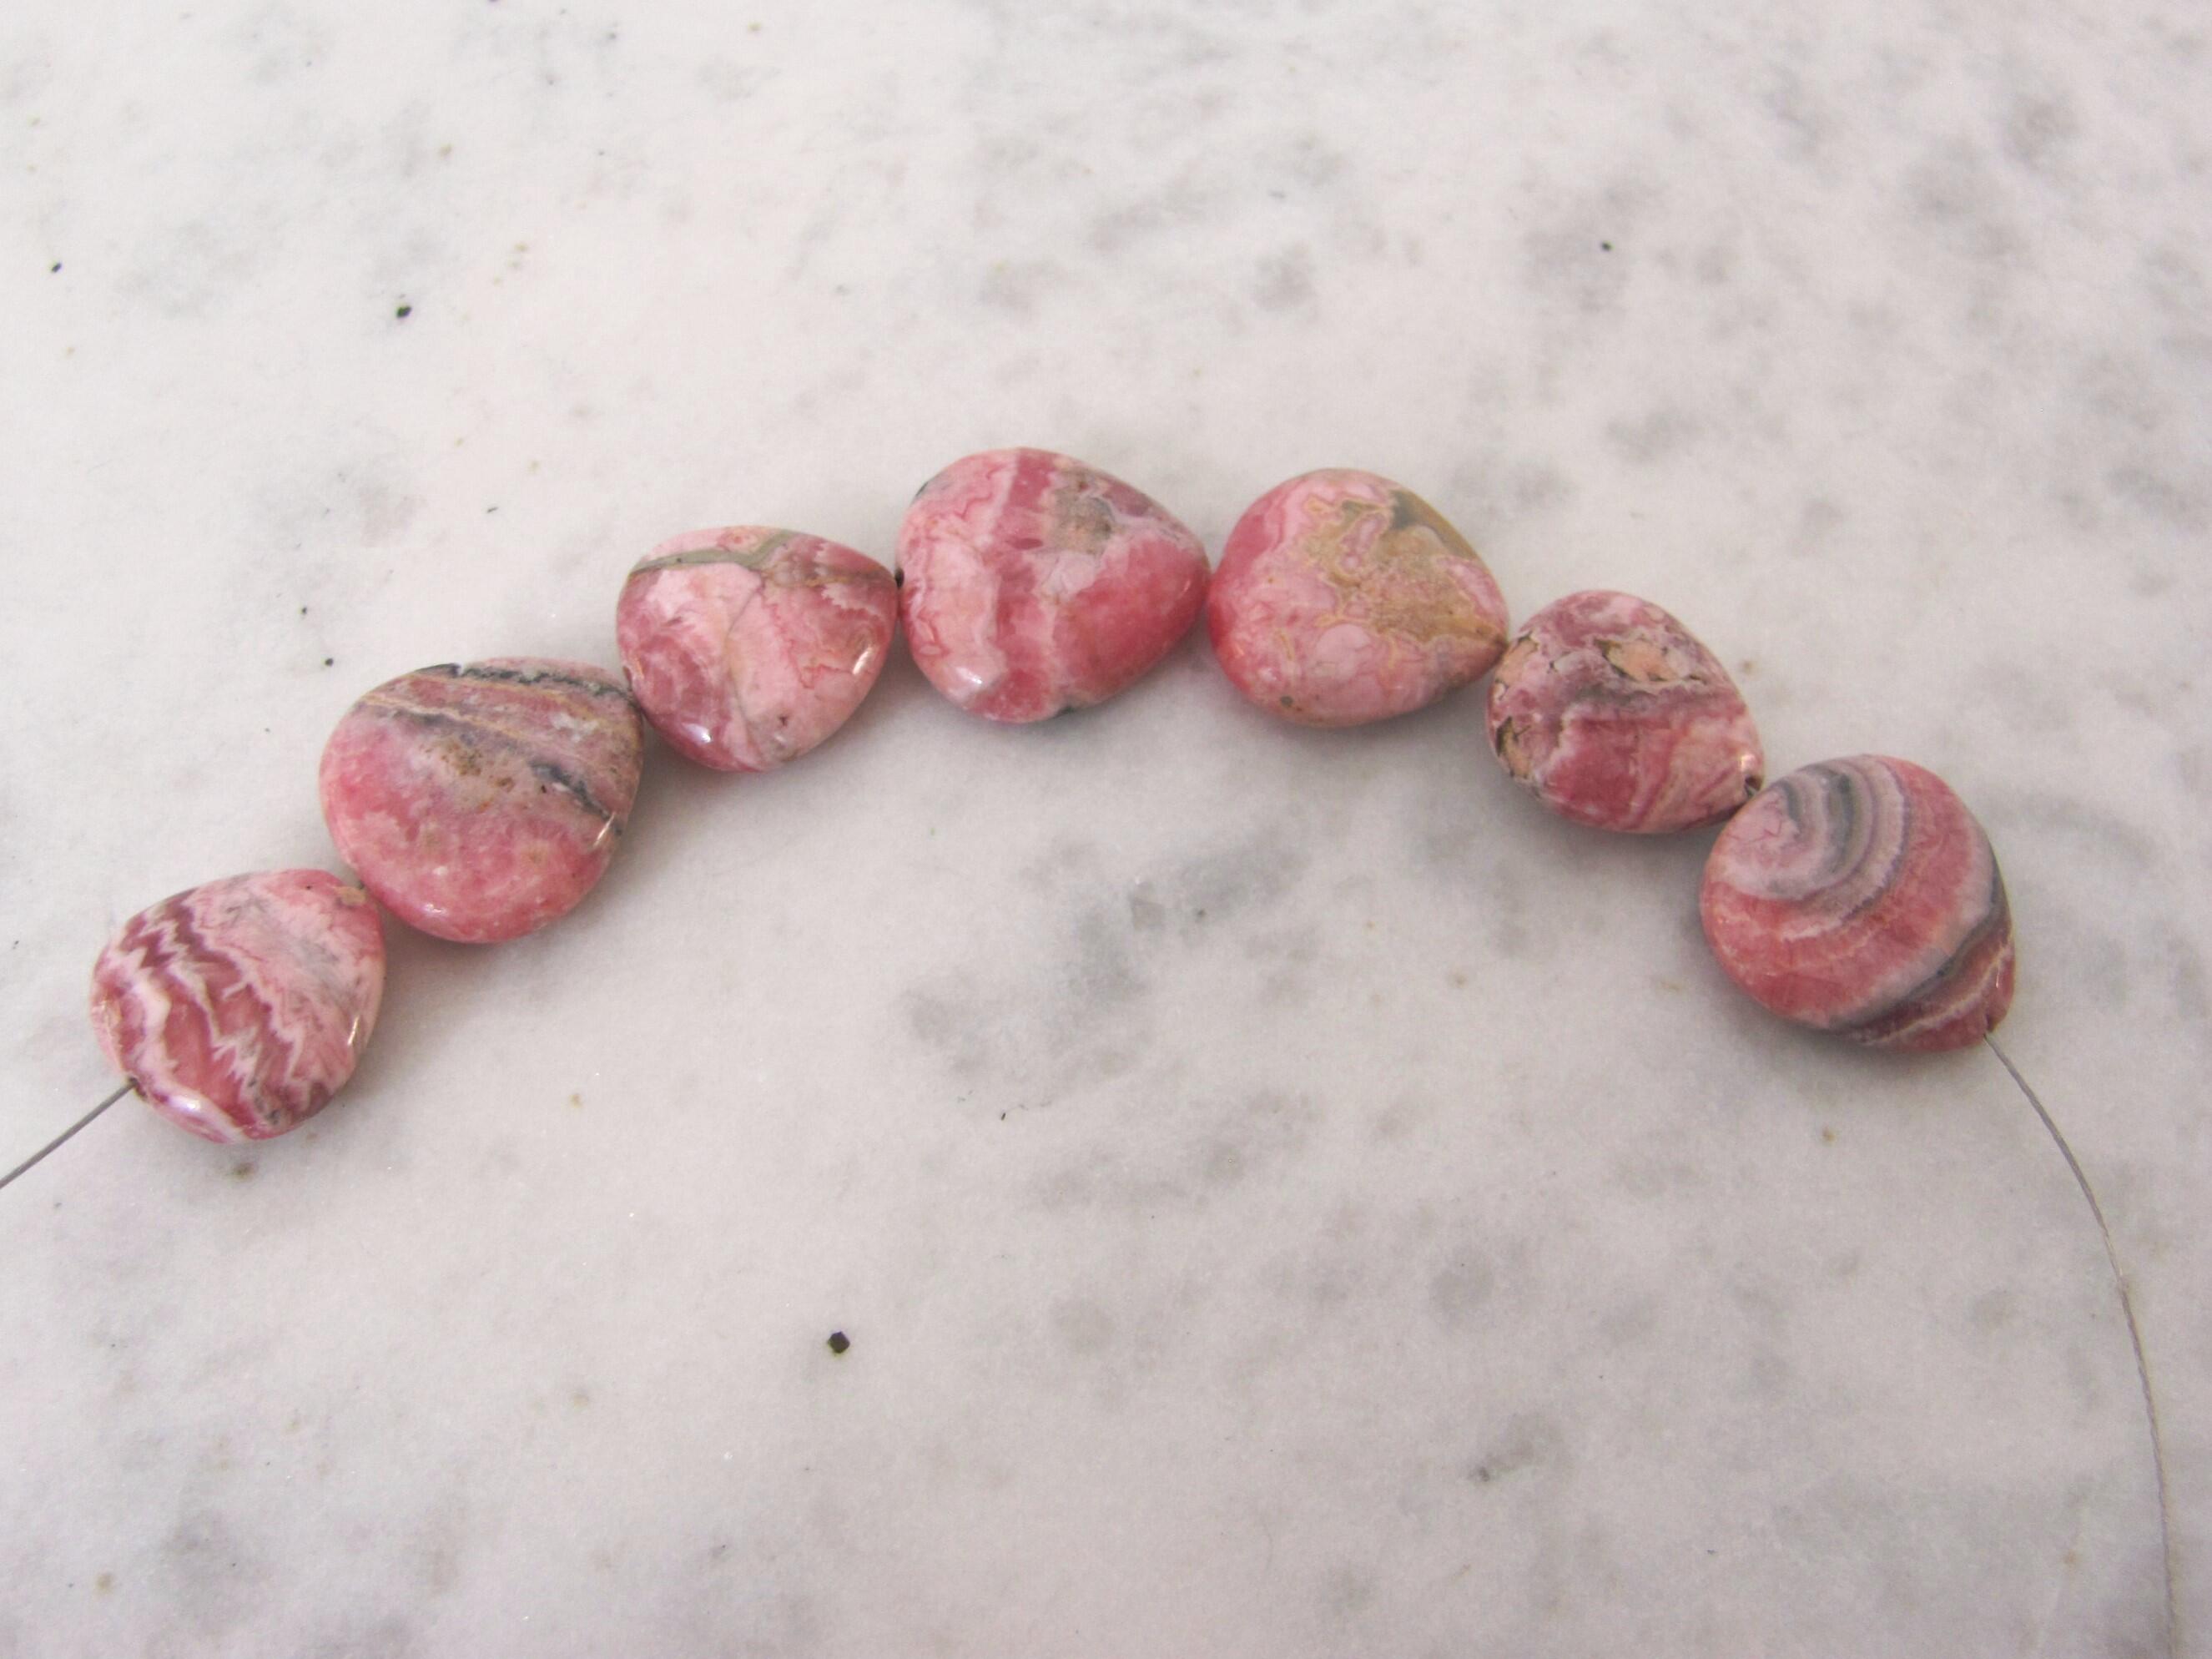 Rhodochrosite Necklace in Sterling Silver or Gold Filled